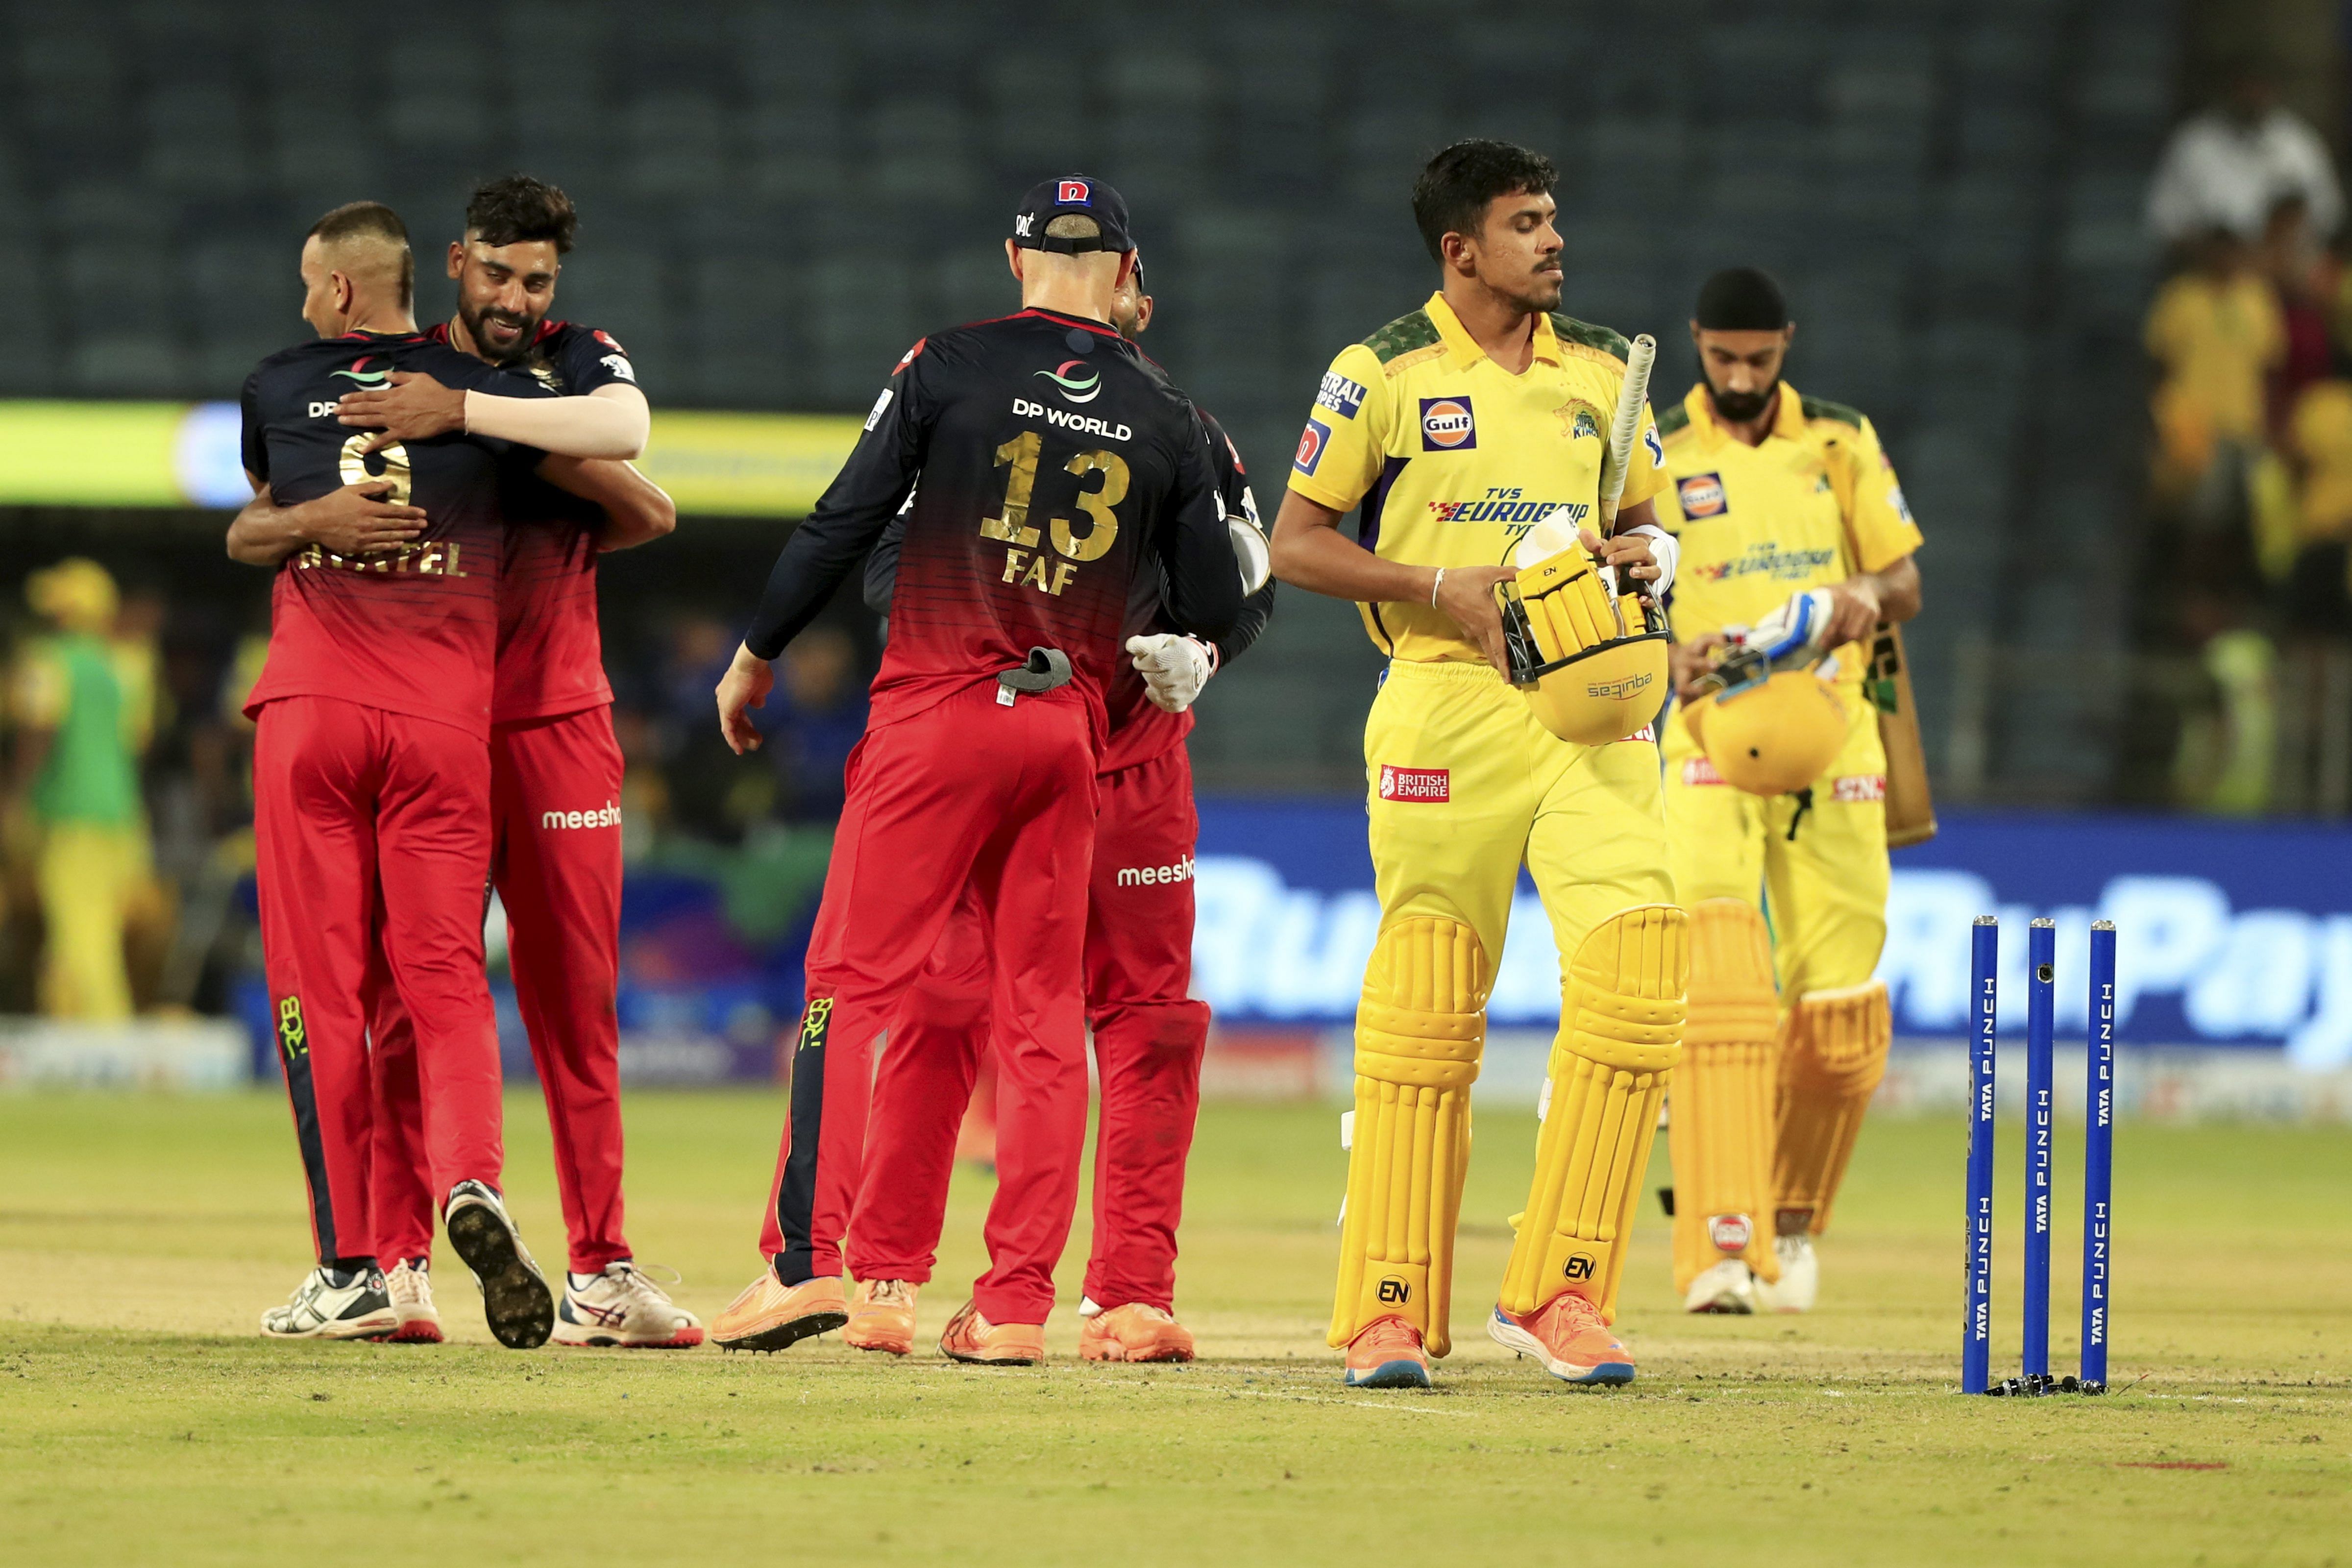 Royal Challengers Bangalore players greet each other celebrating their win against the Chennai Super Kings during the 49th T20 cricket match of the Indian Premier League 2022. Credit: PTI Photo